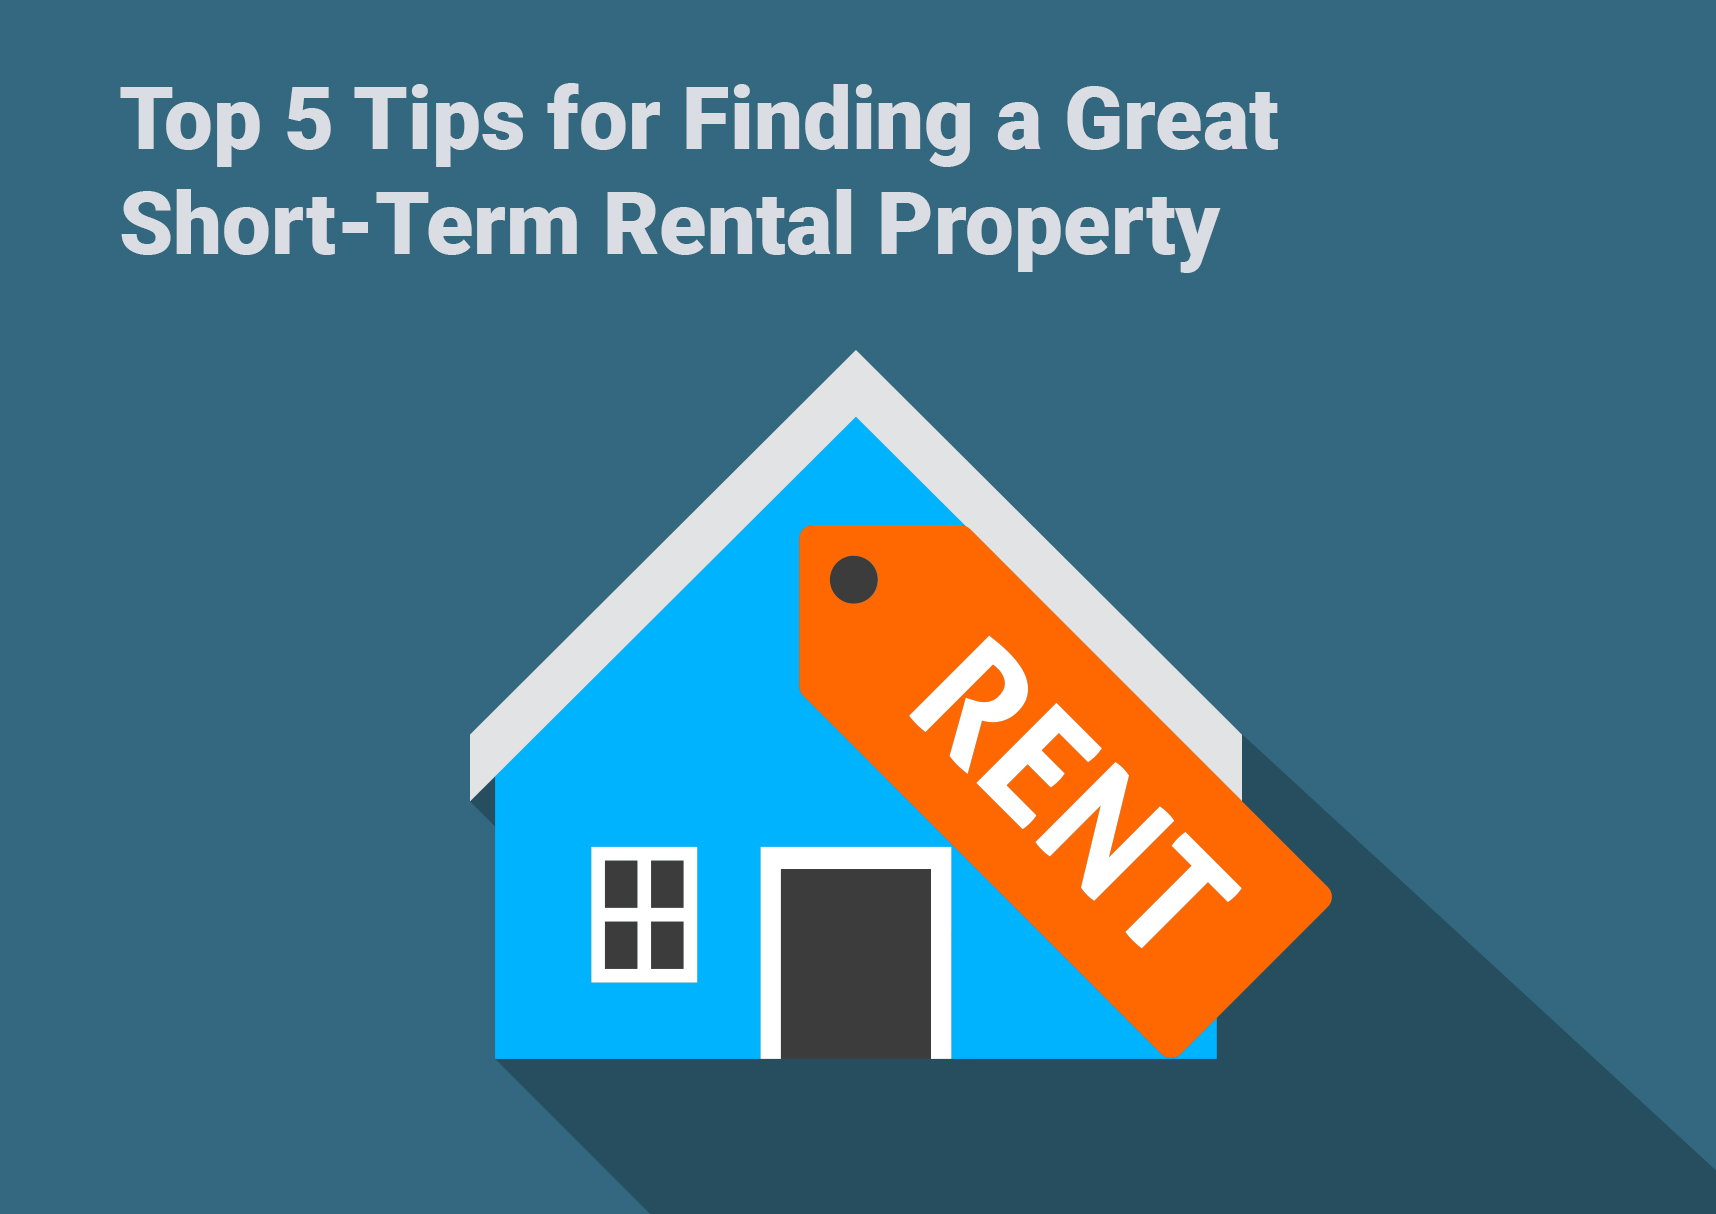 Top 5 Tips for Finding a Great Short-Term Rental Properties